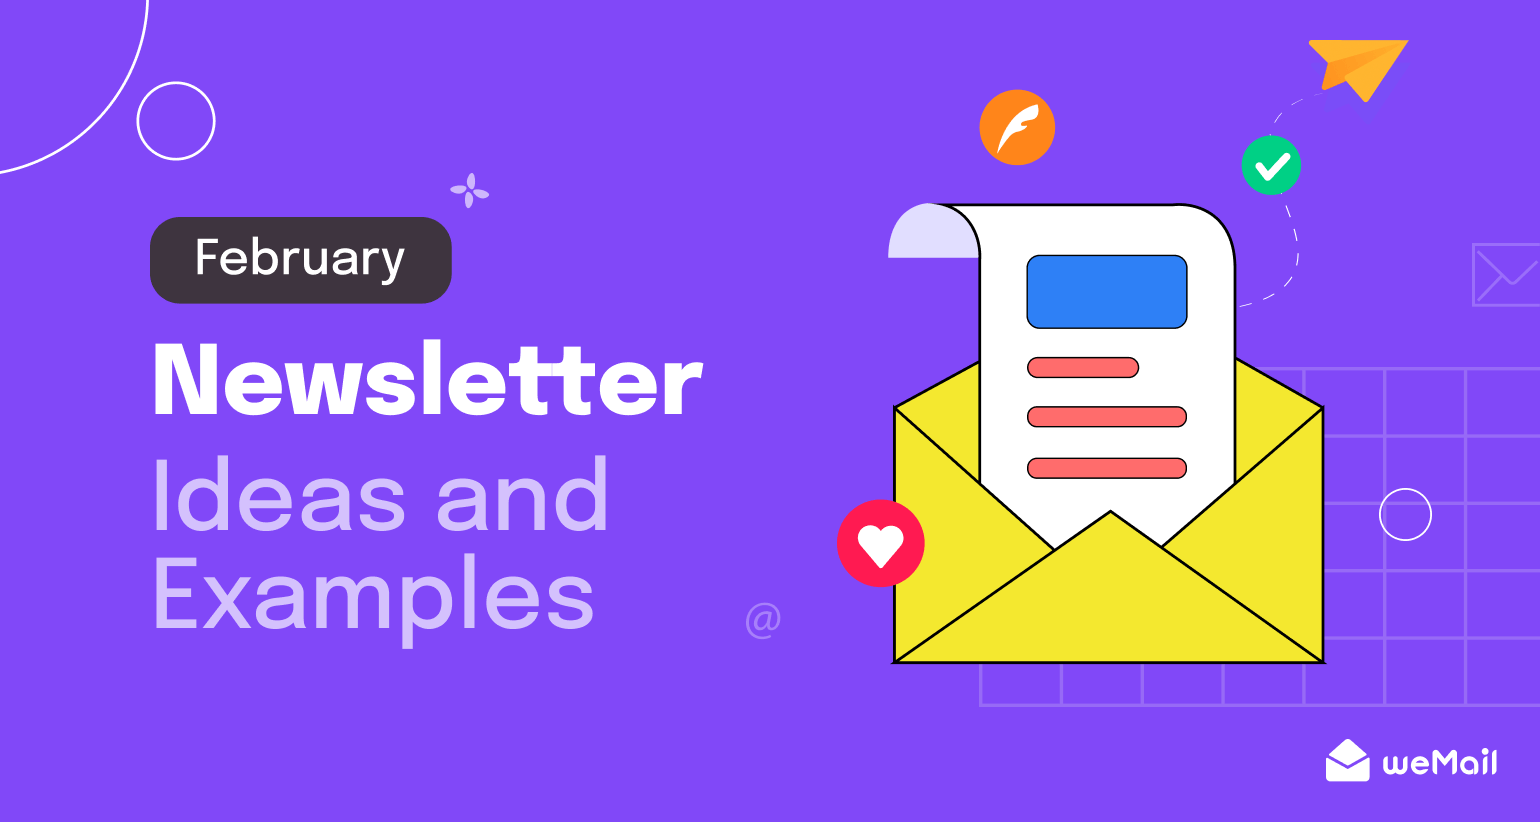 February Newsletter Ideas and Examples